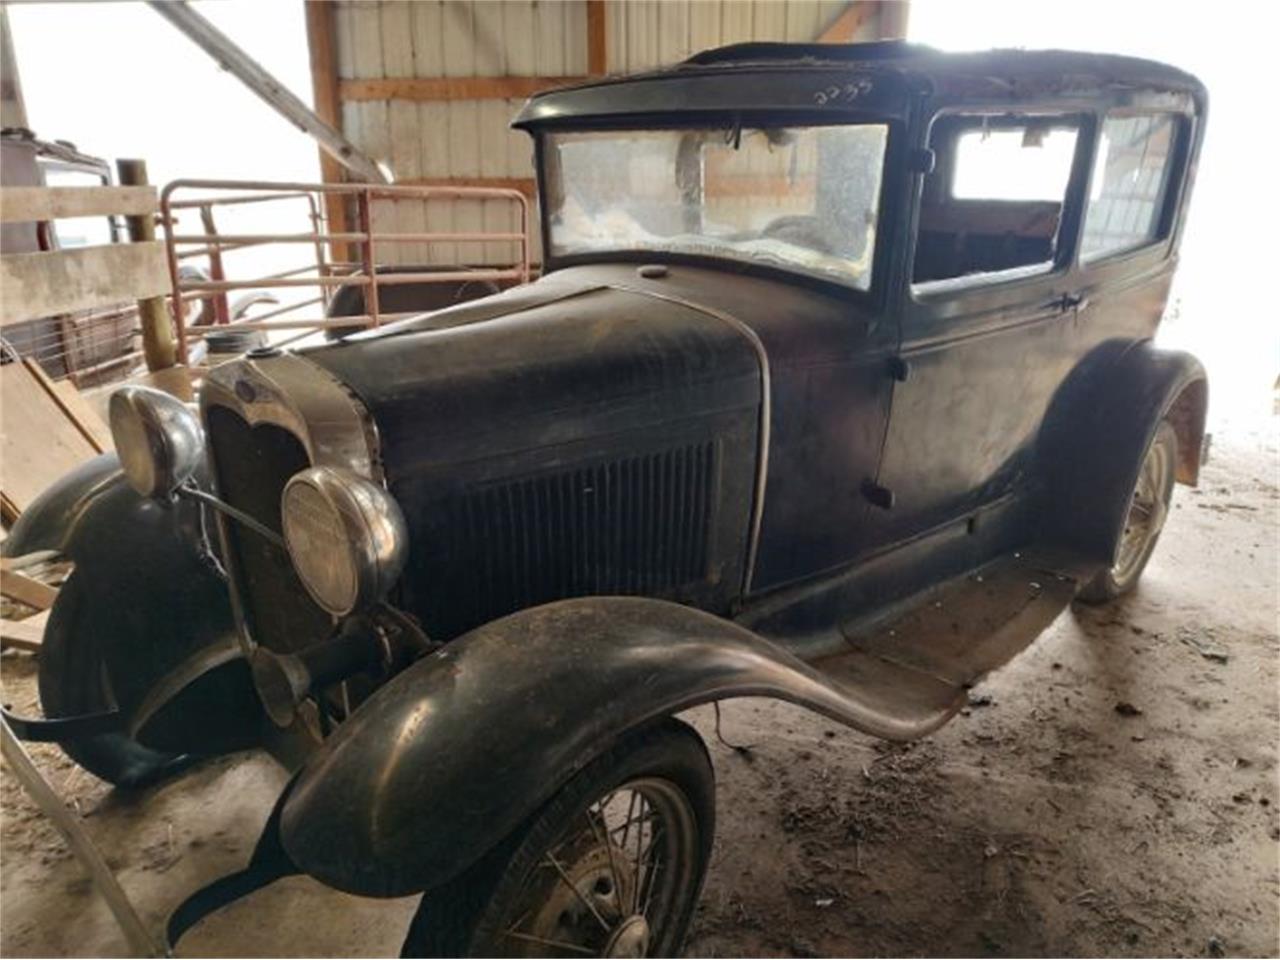 For Sale: 1930 Ford Model A in Cadillac, Michigan for sale in Cadillac, MI